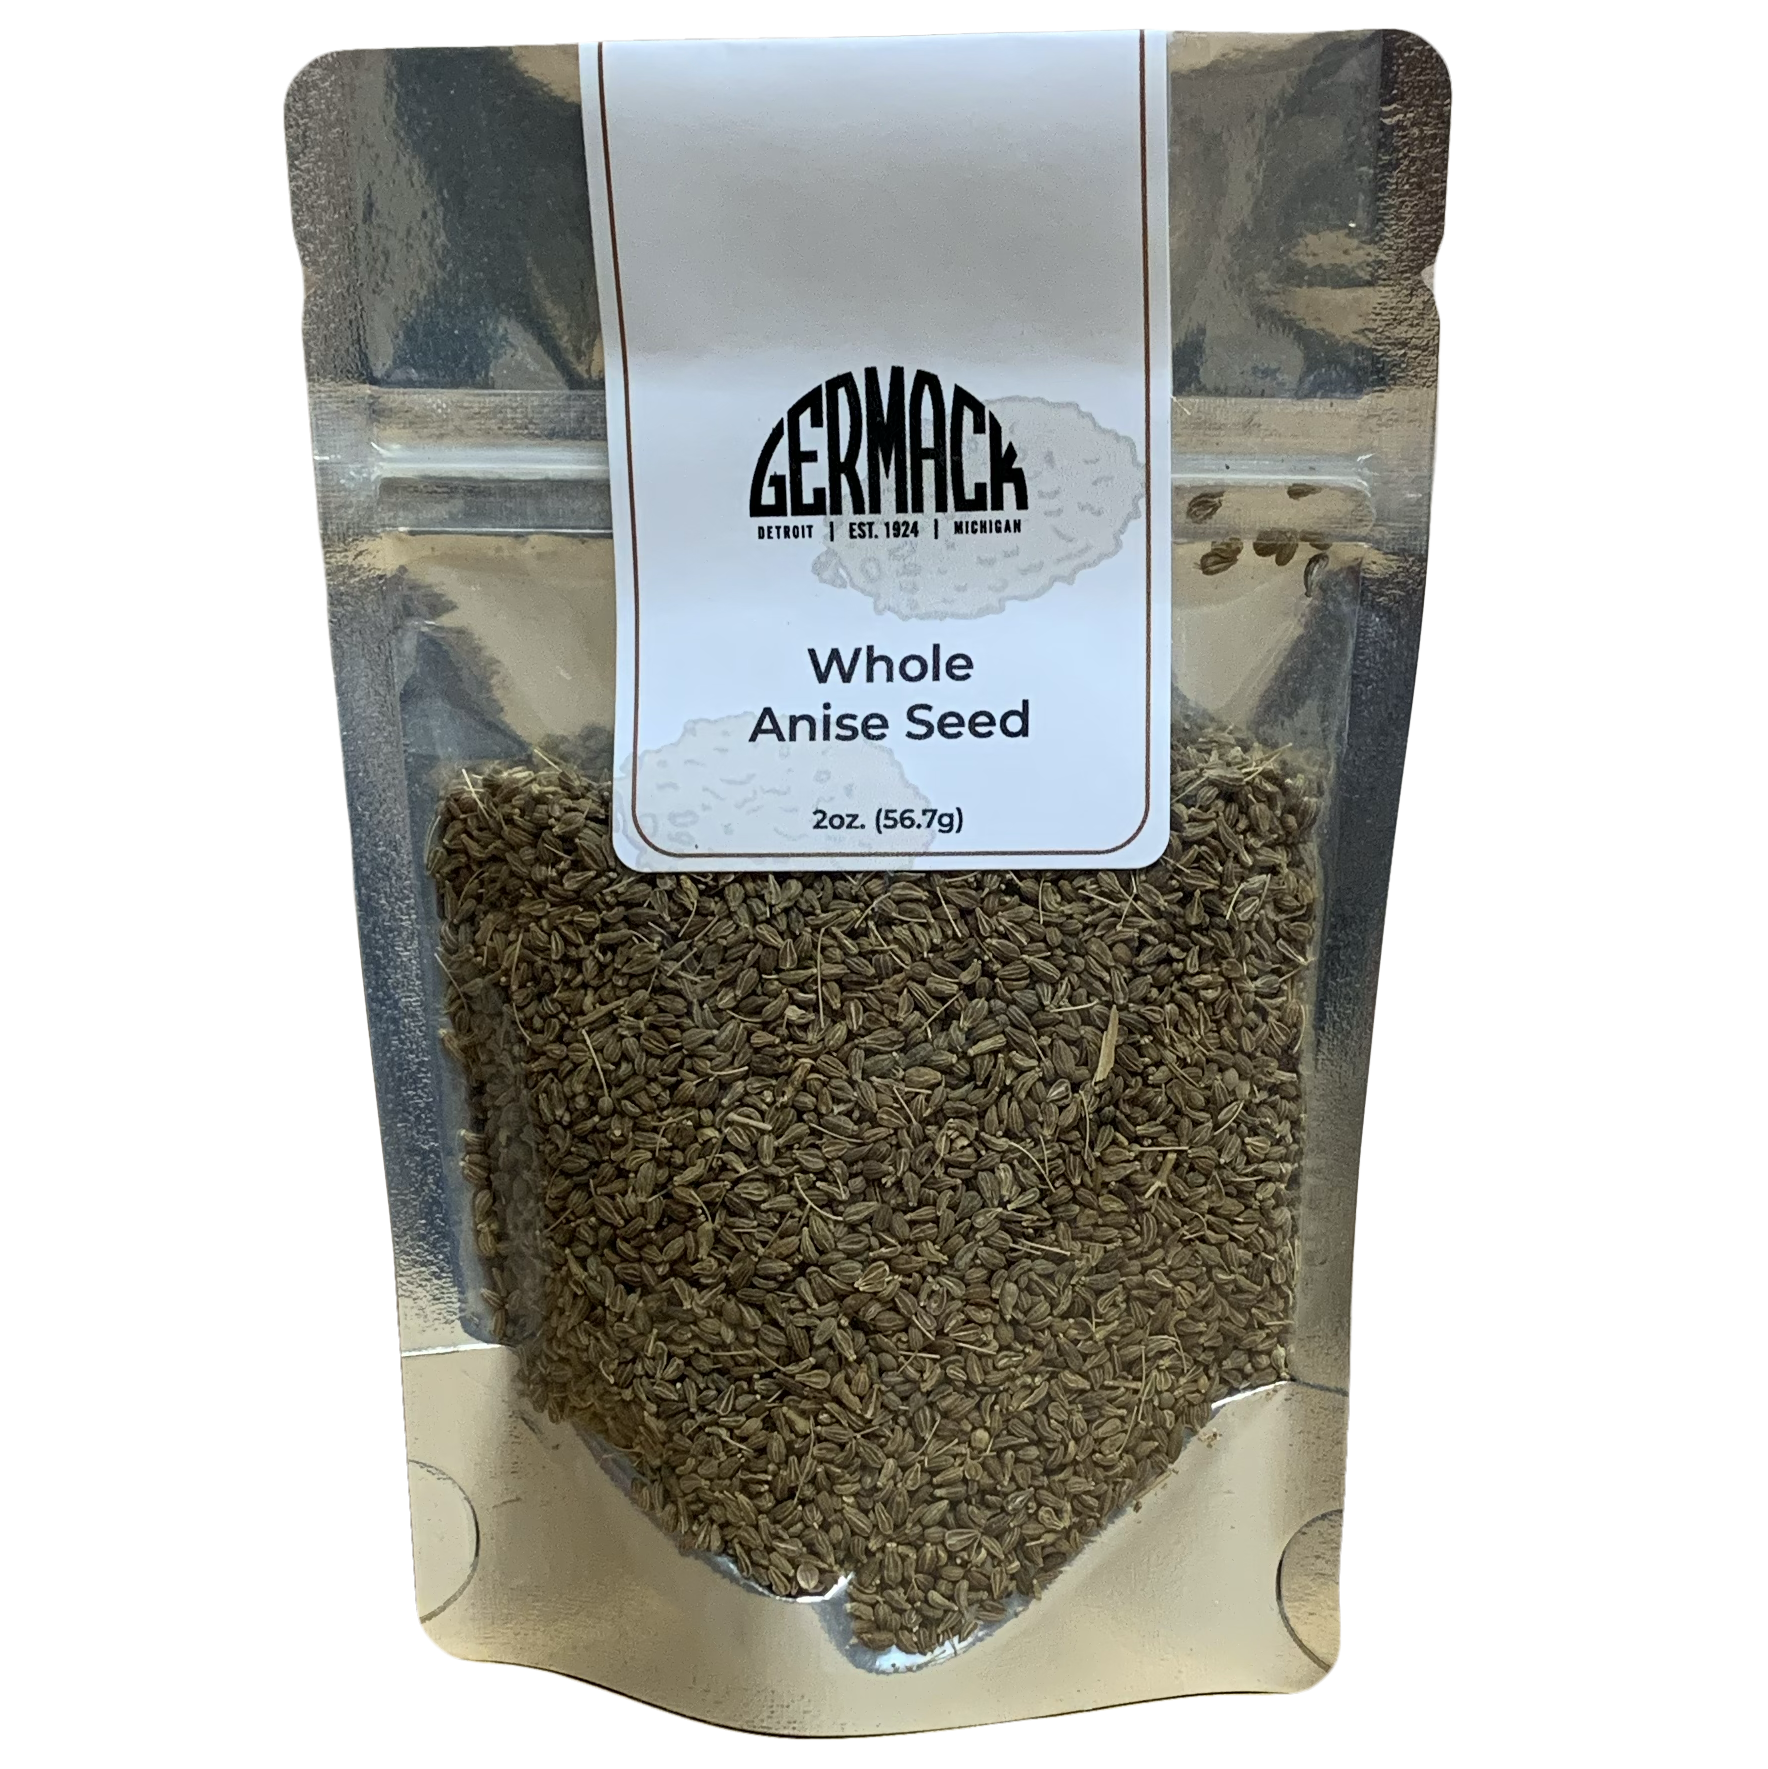 Picture Anise Seed (Whole), 2oz